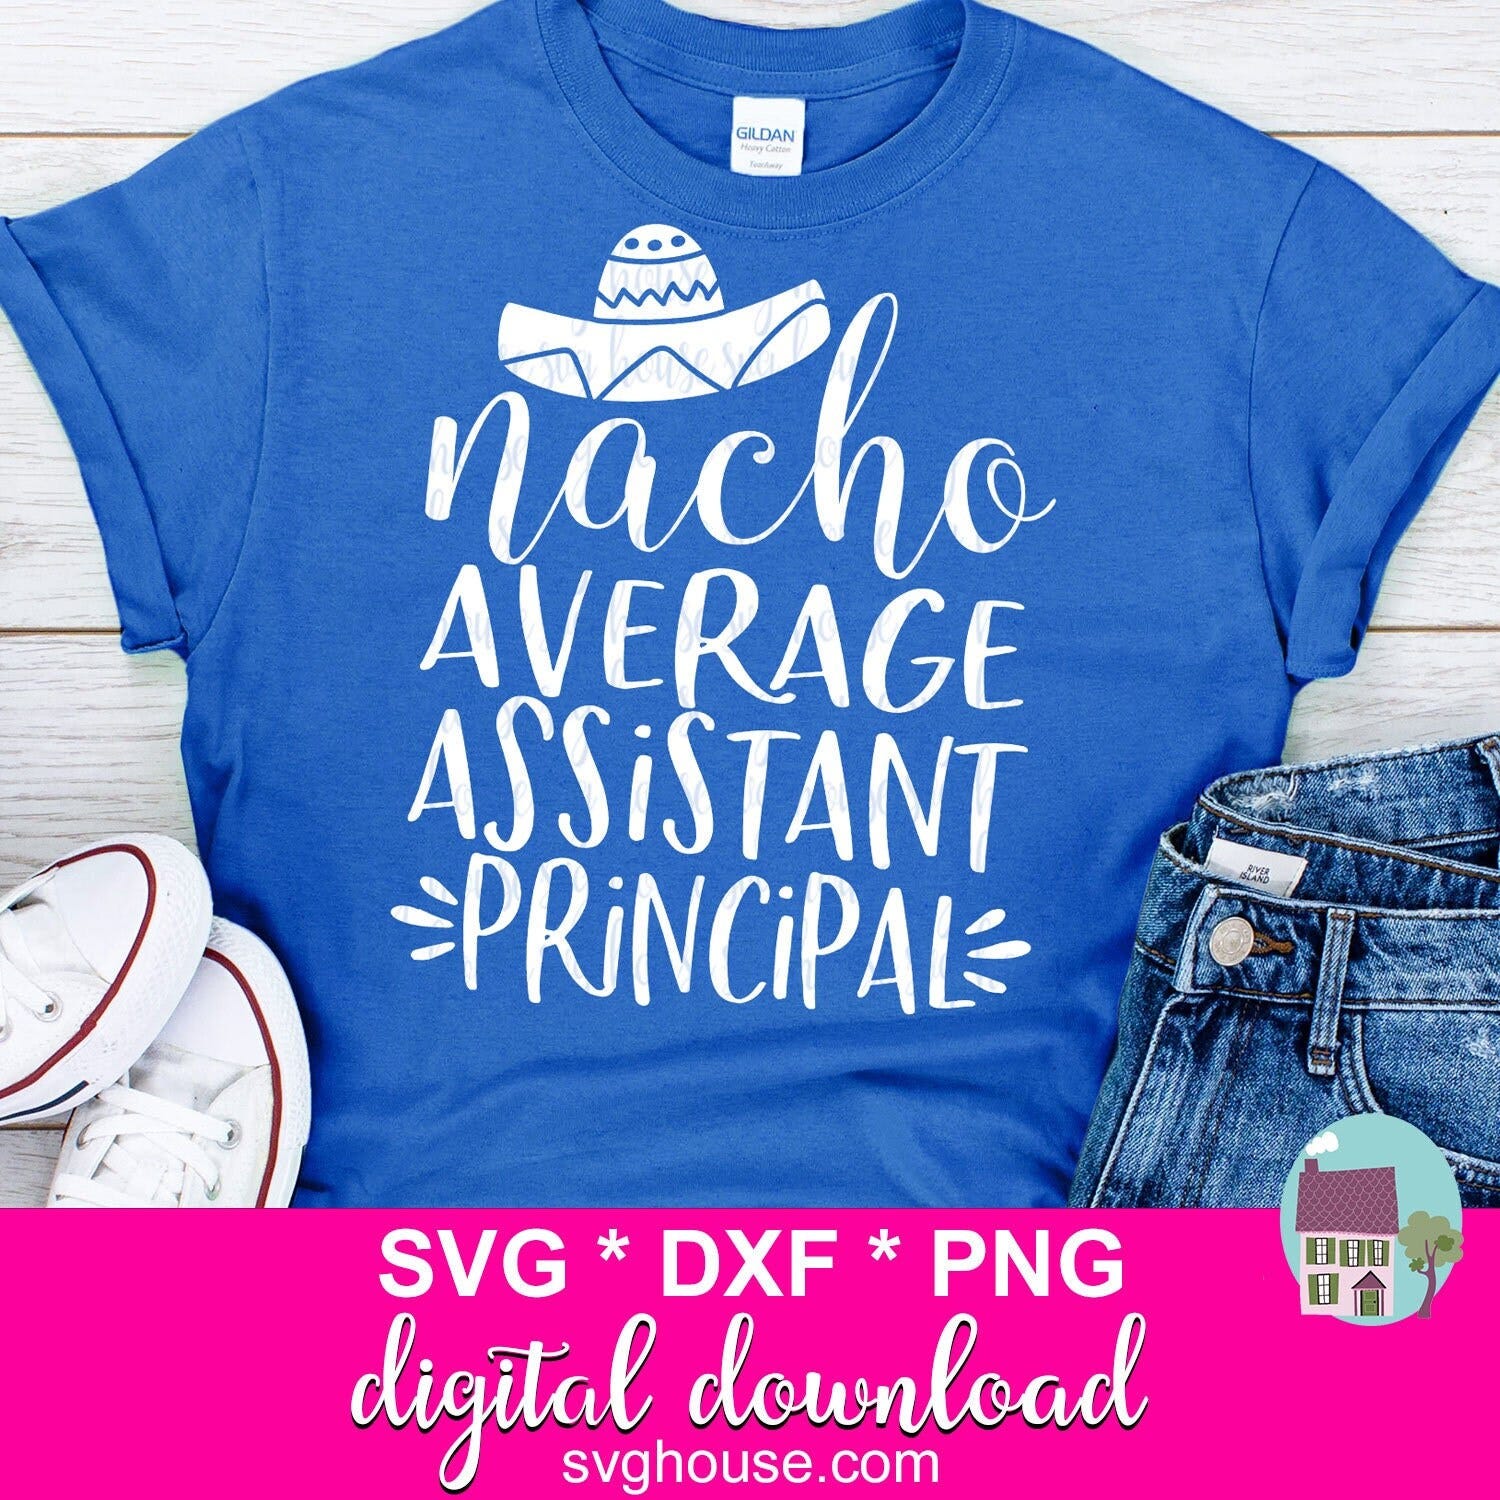 Assistant Principal SVG, Nacho Average SVG, SVG Files For Cricut And Silhouette, Svg, Dxf and Png